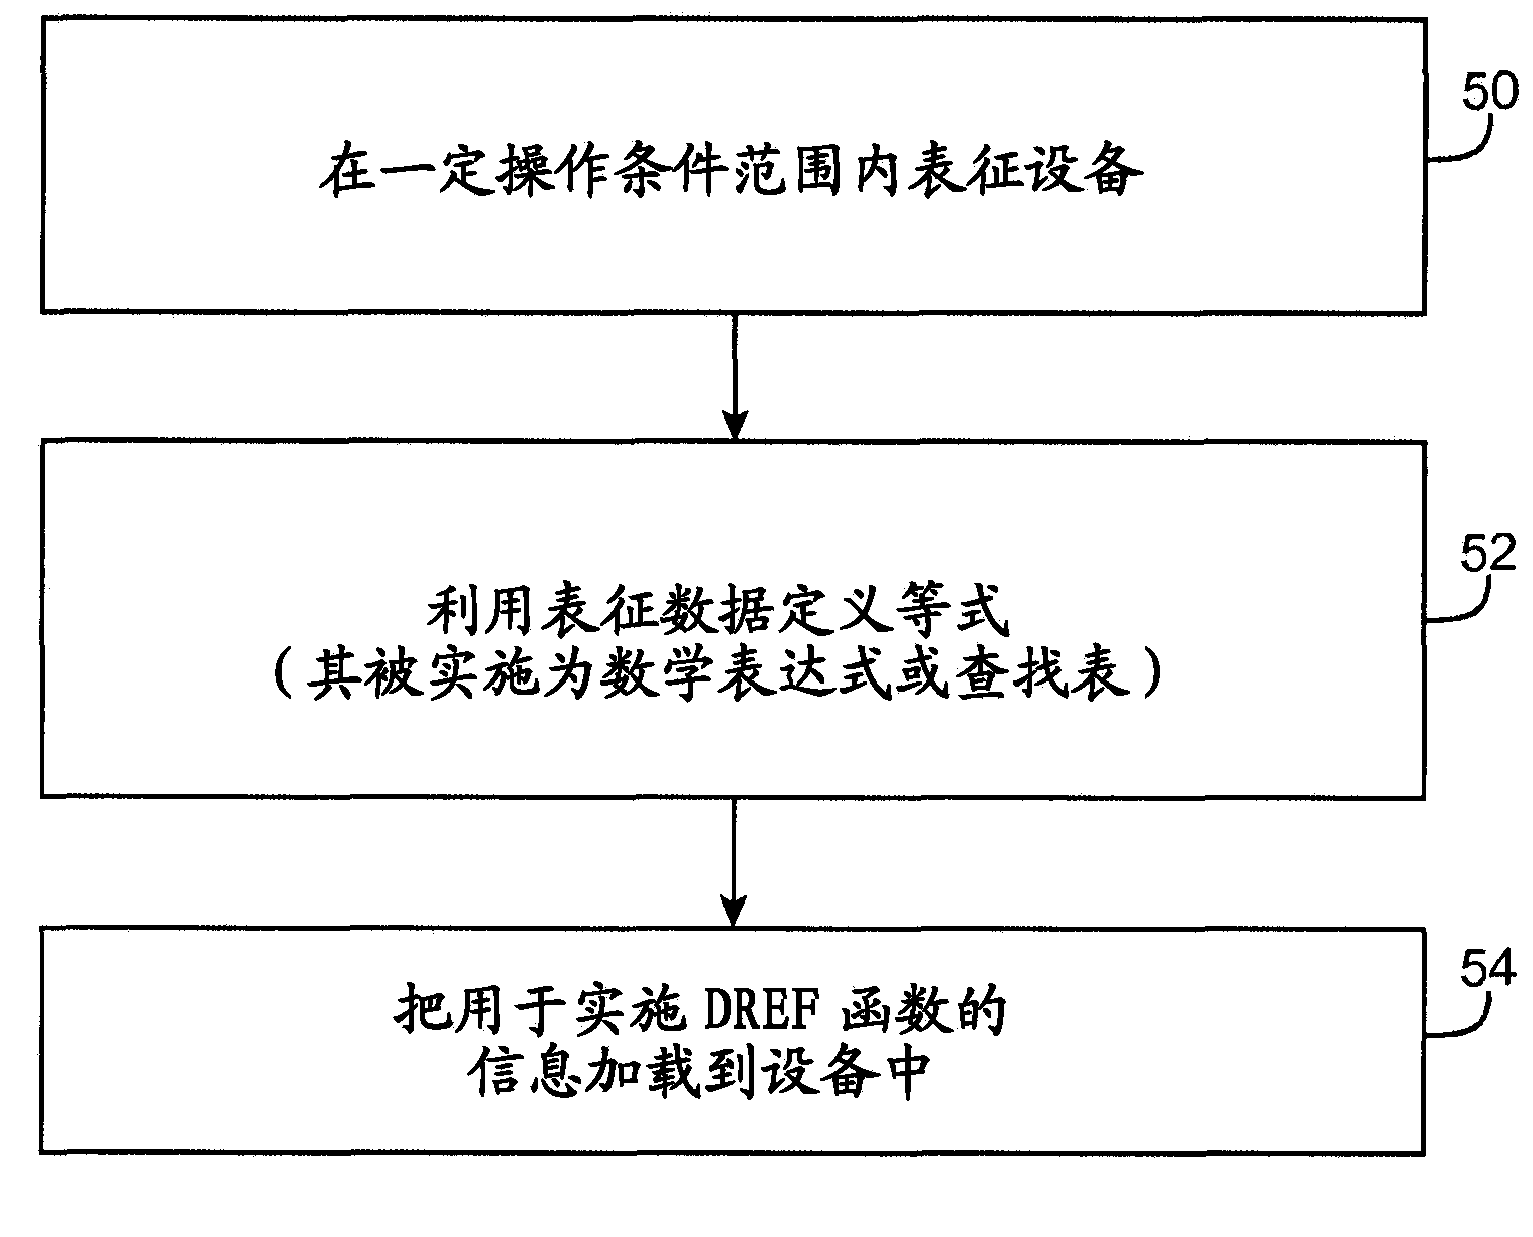 Method for optimizing power consumption in wireless devices using data rate efficiency factor